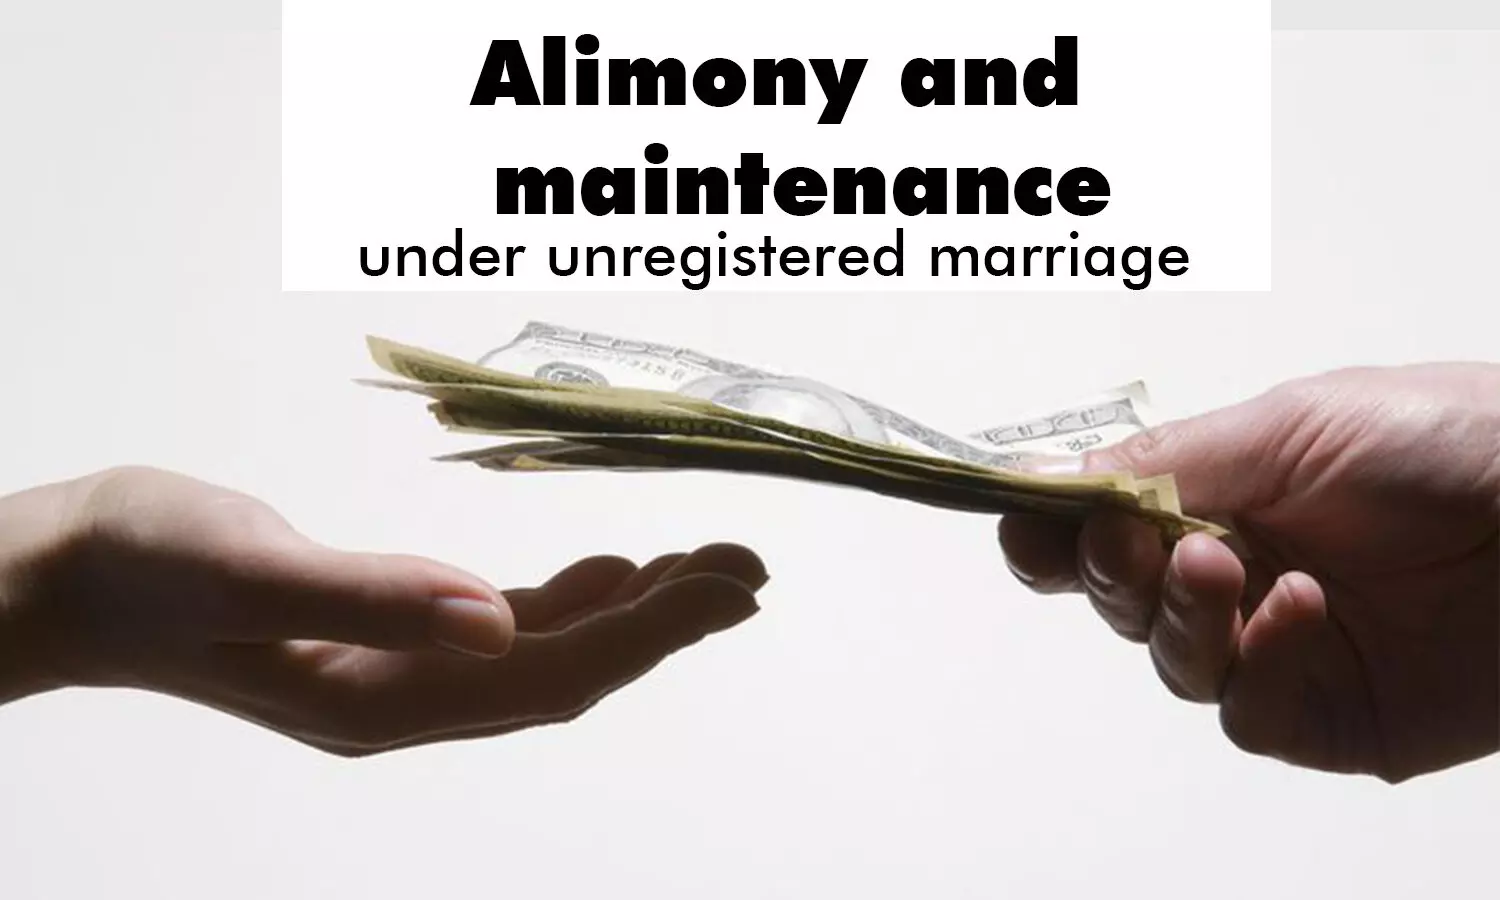 About the Law, Know your Rights on Divorce, Alimony and Maintenance under unregistered marriage?